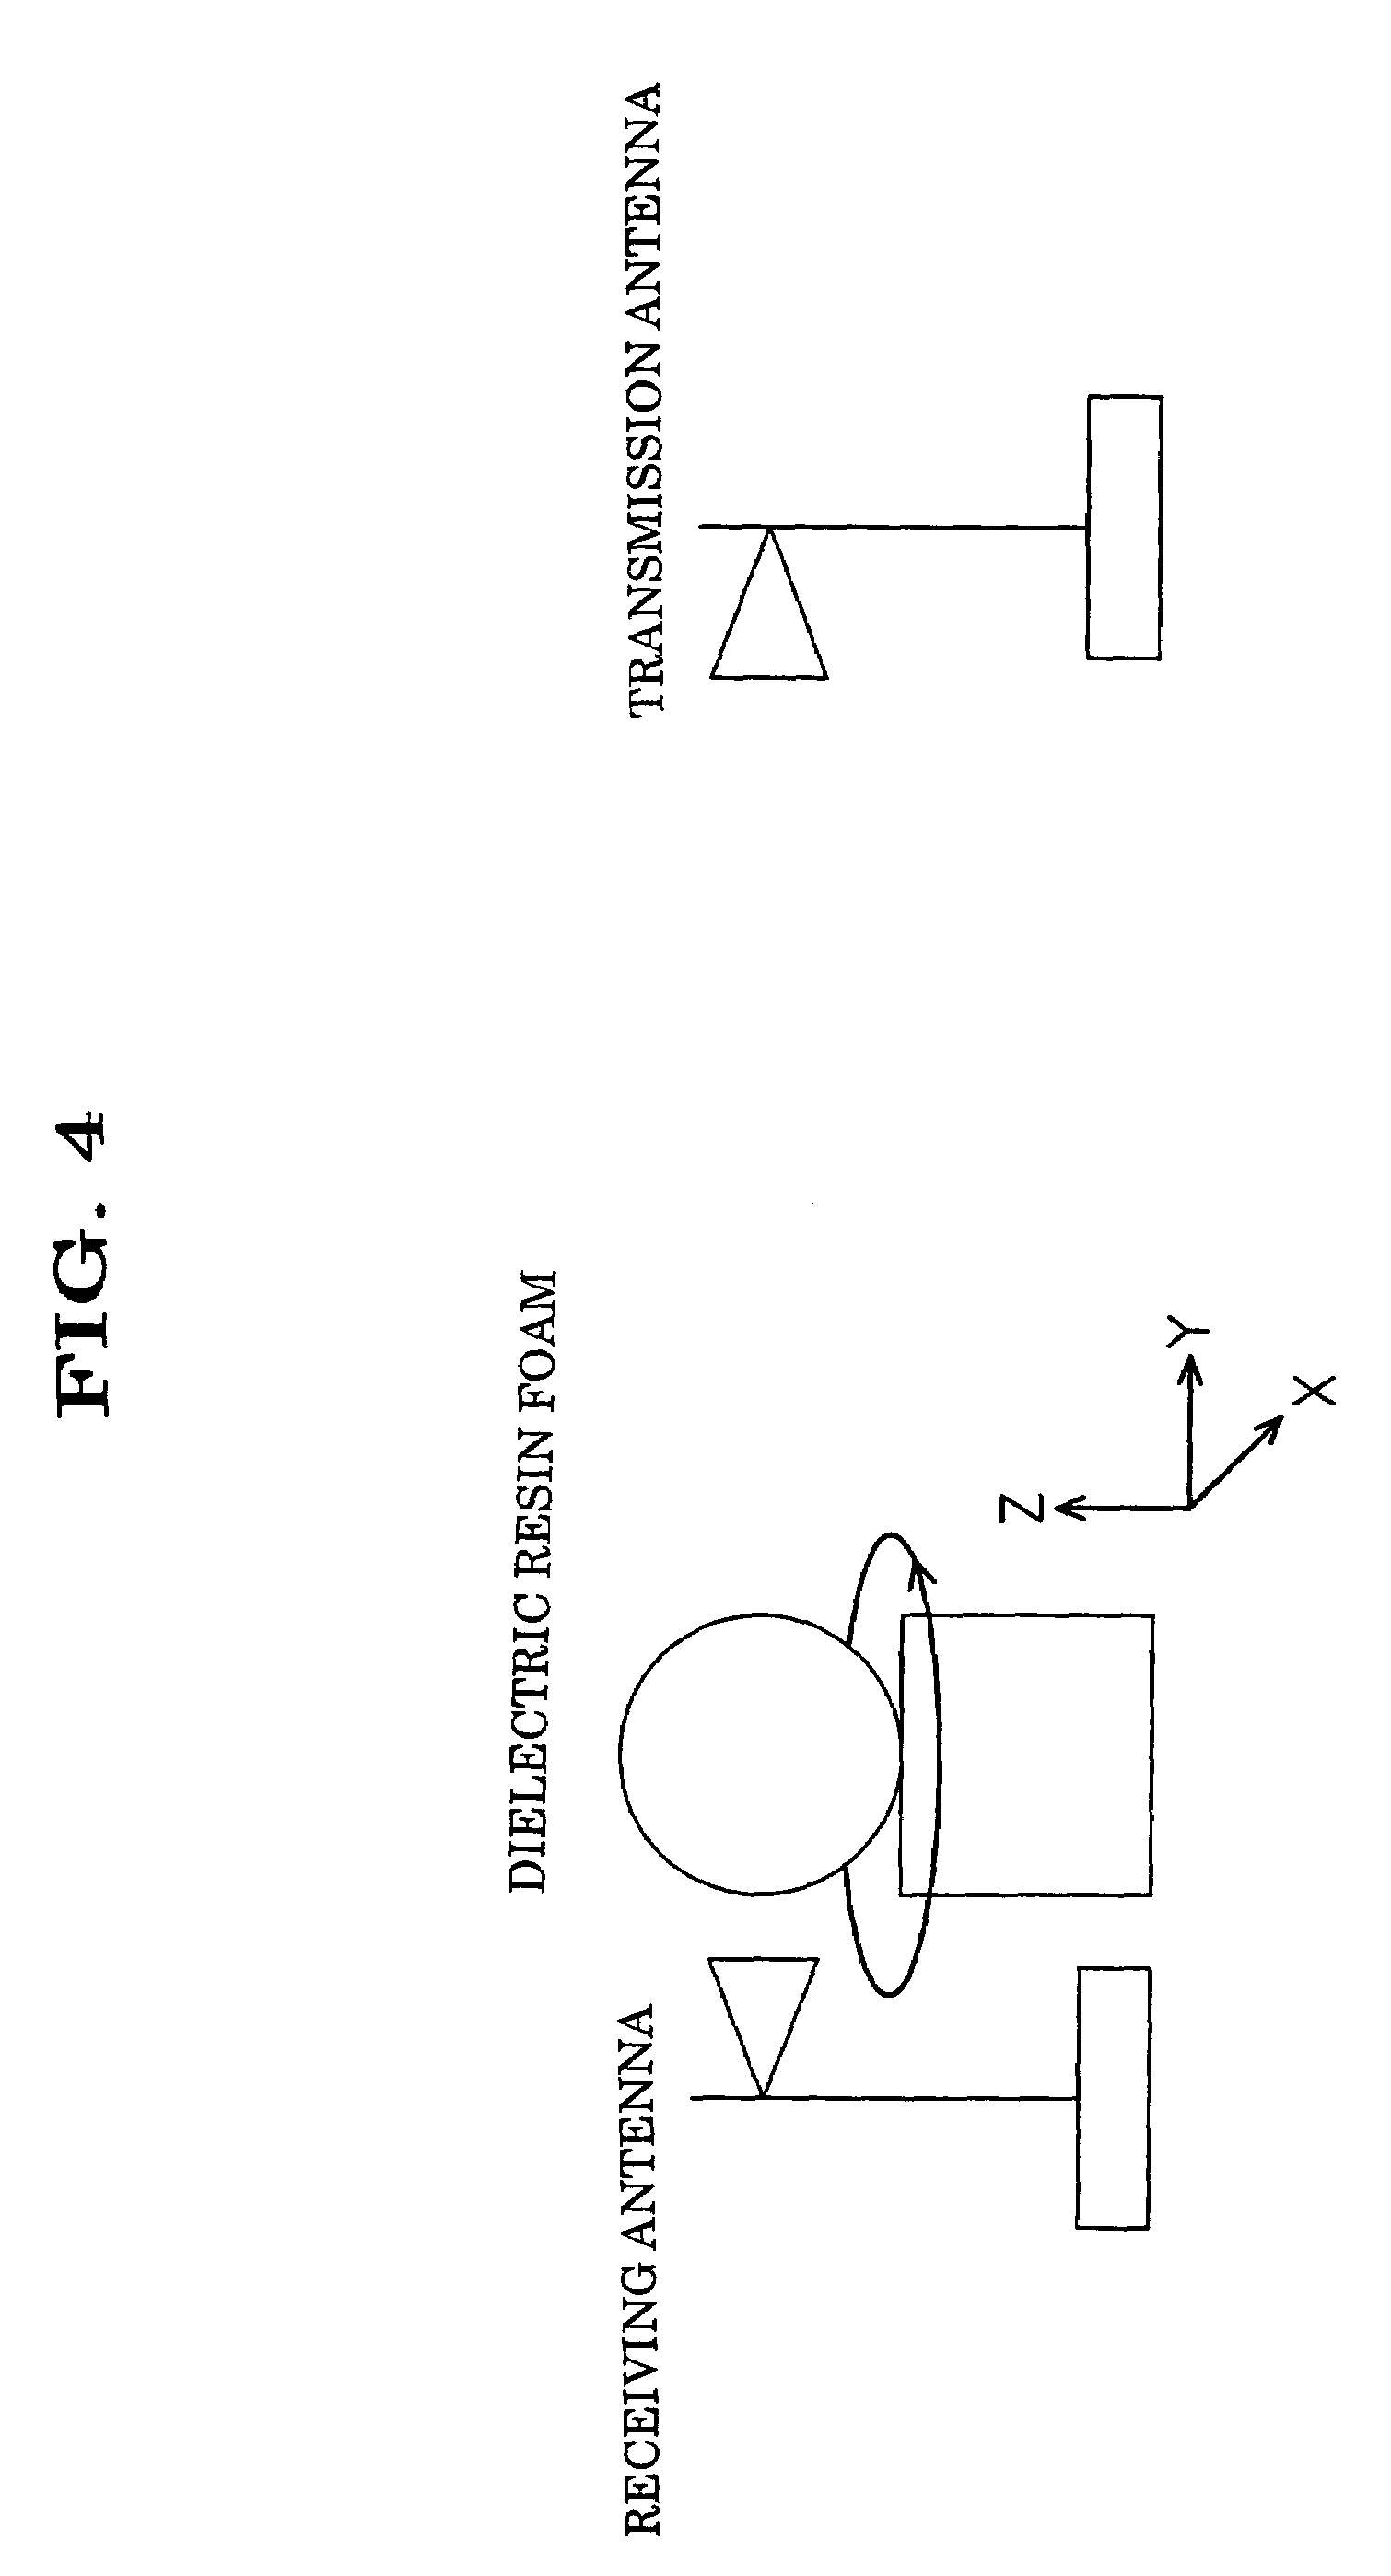 Dielectric resin foam and lens for radio waves using the same